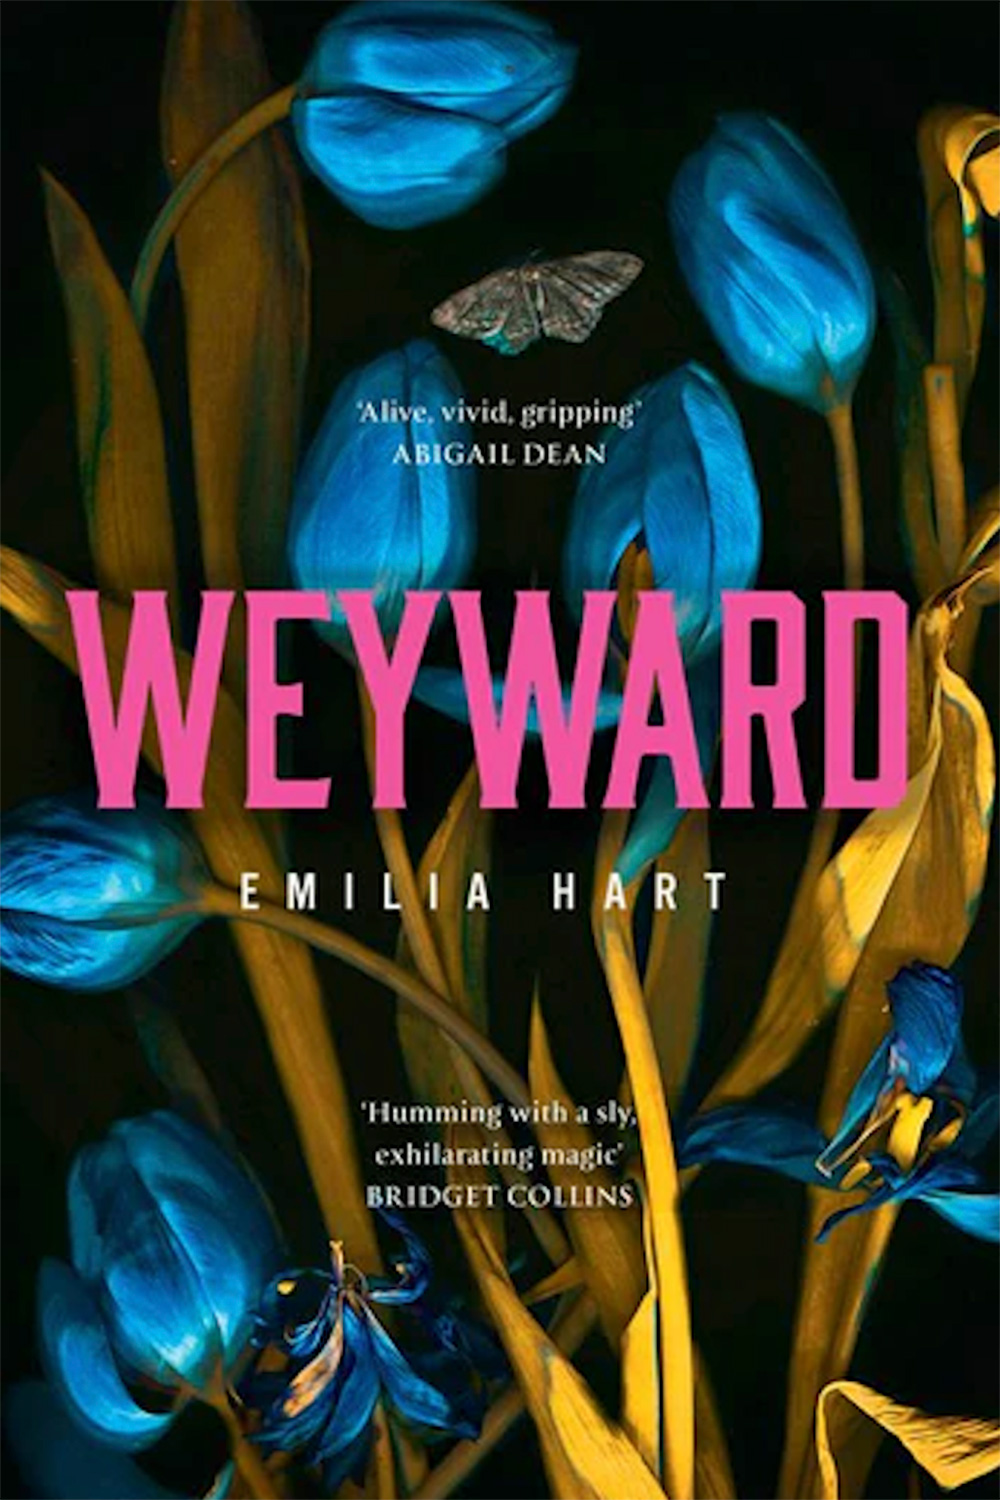 The front cover of Emilia Hart